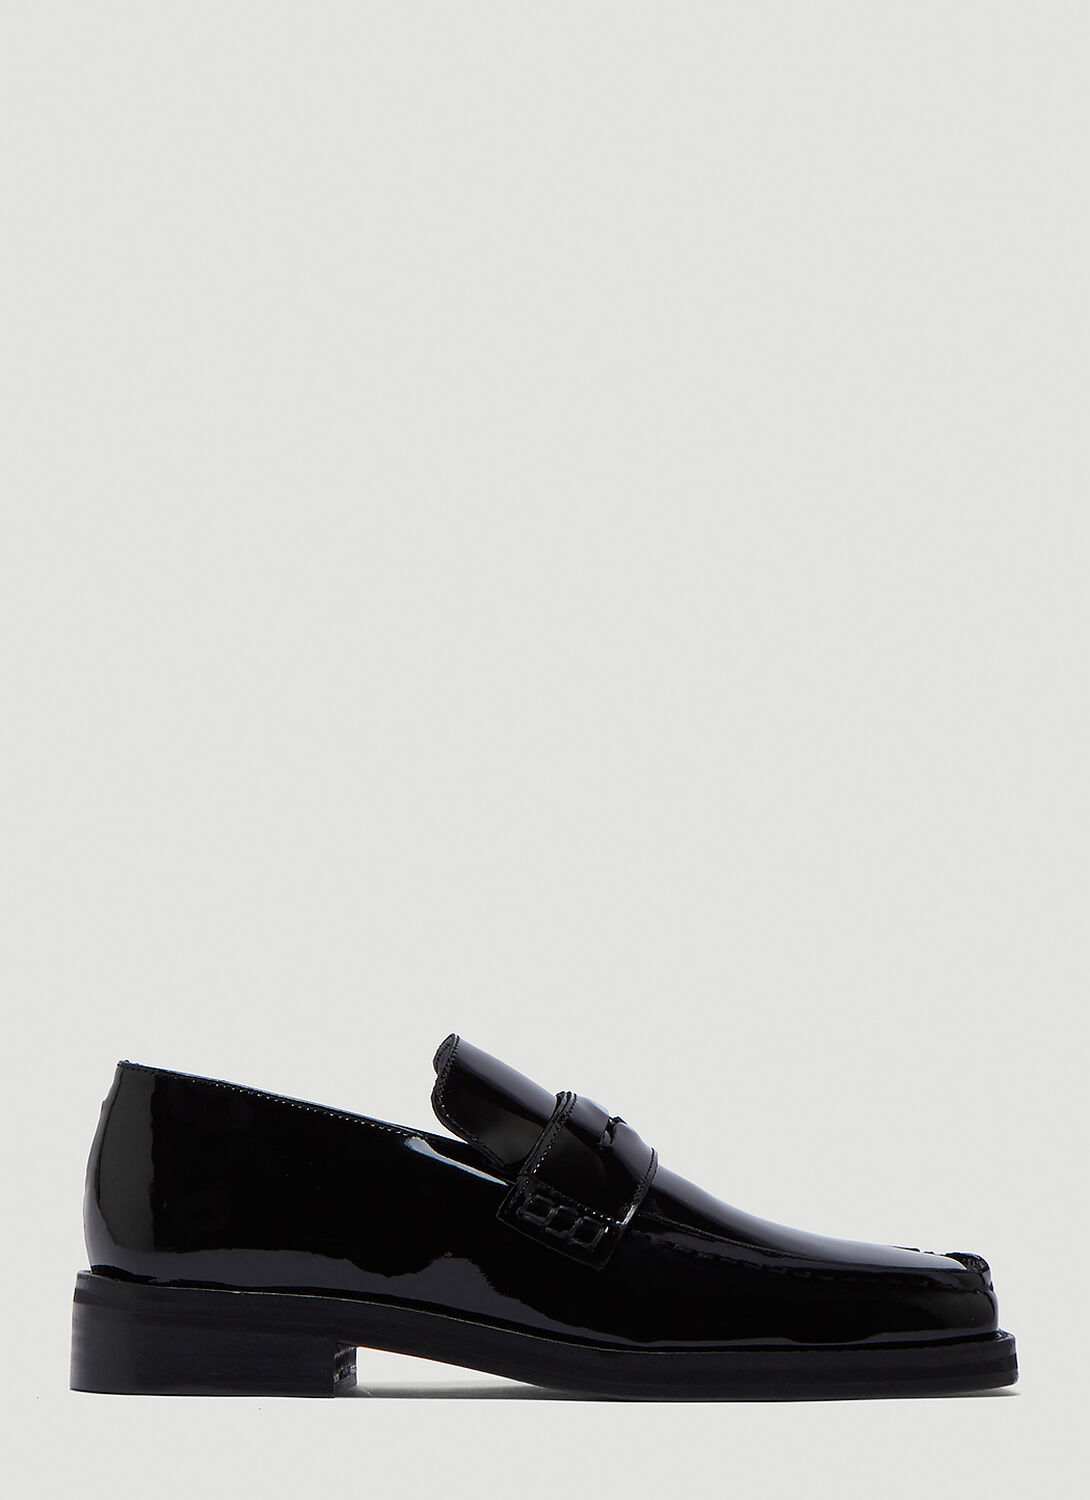 MARTINE ROSE ROXY PATENT LOAFERS